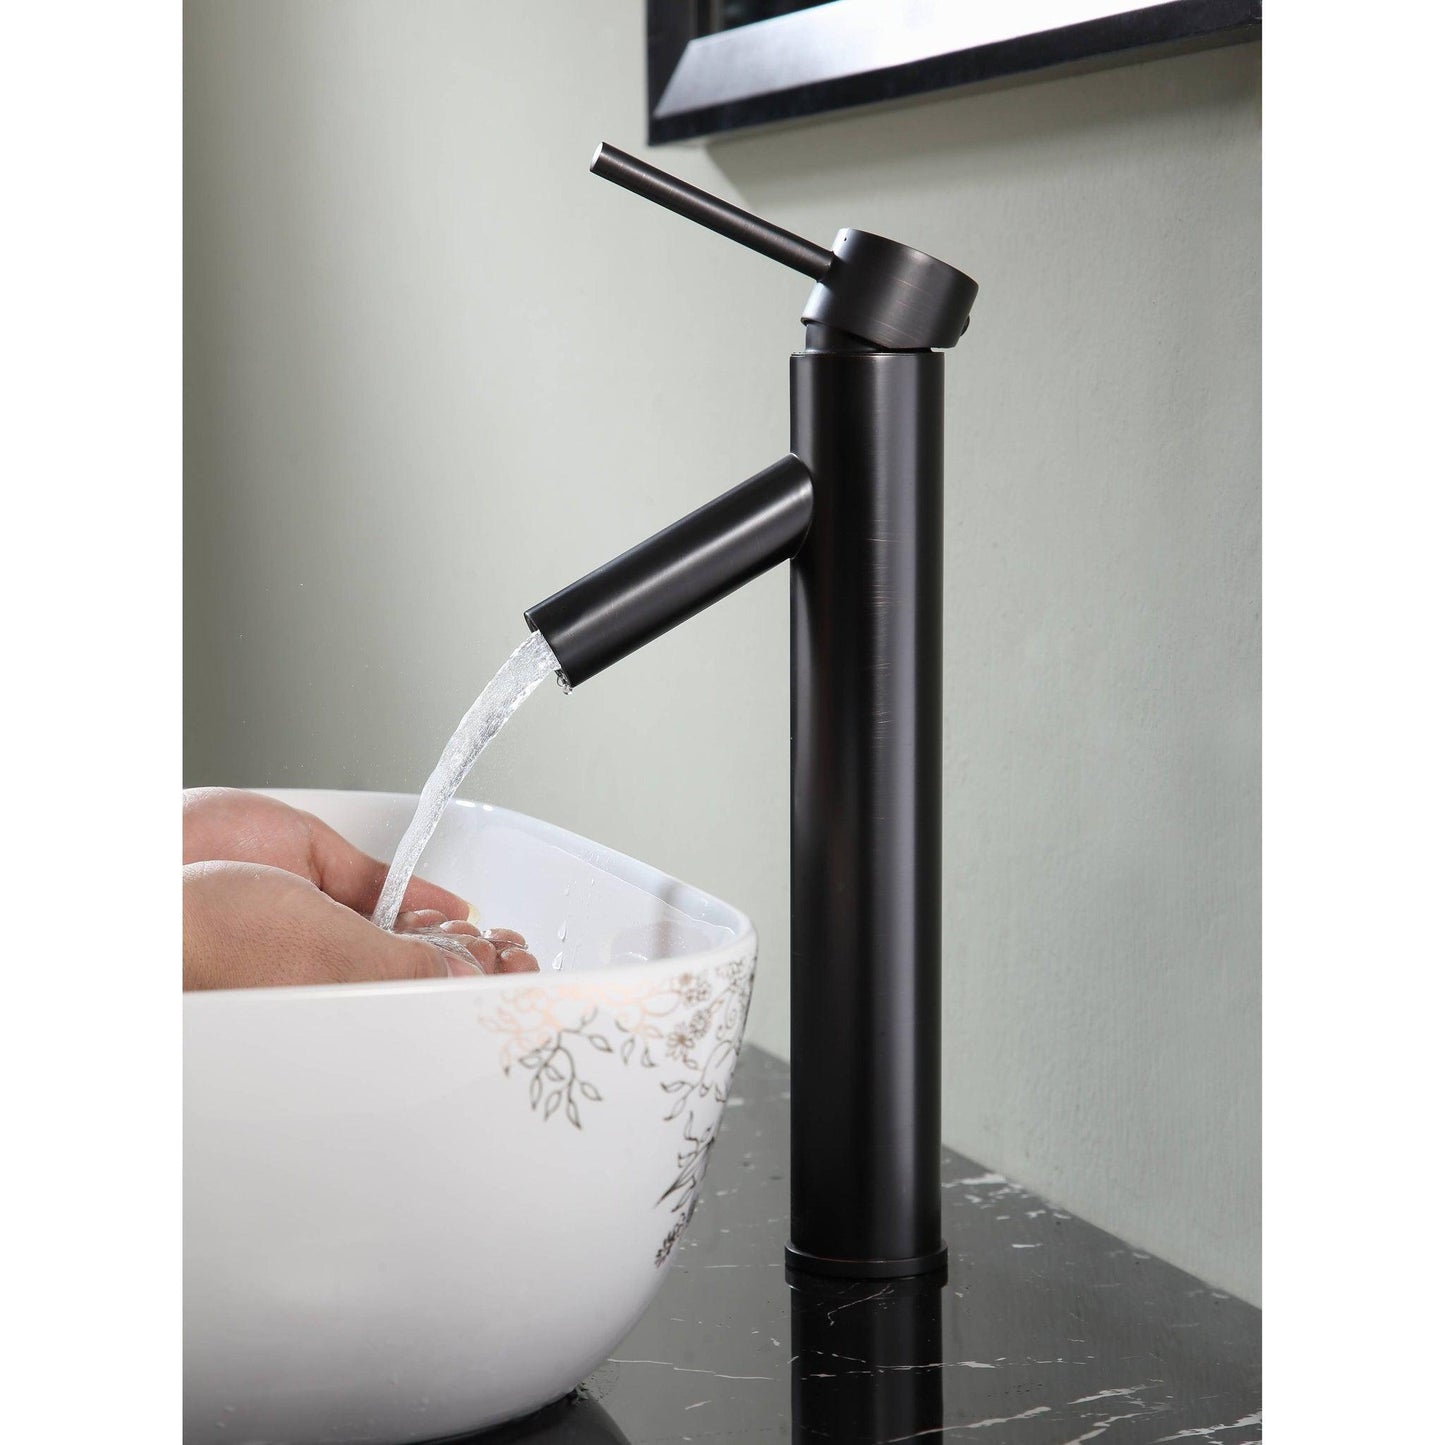 ANZZI Valle Series 8" Single Hole Oil Rubbed Bronze Bathroom Sink Faucet